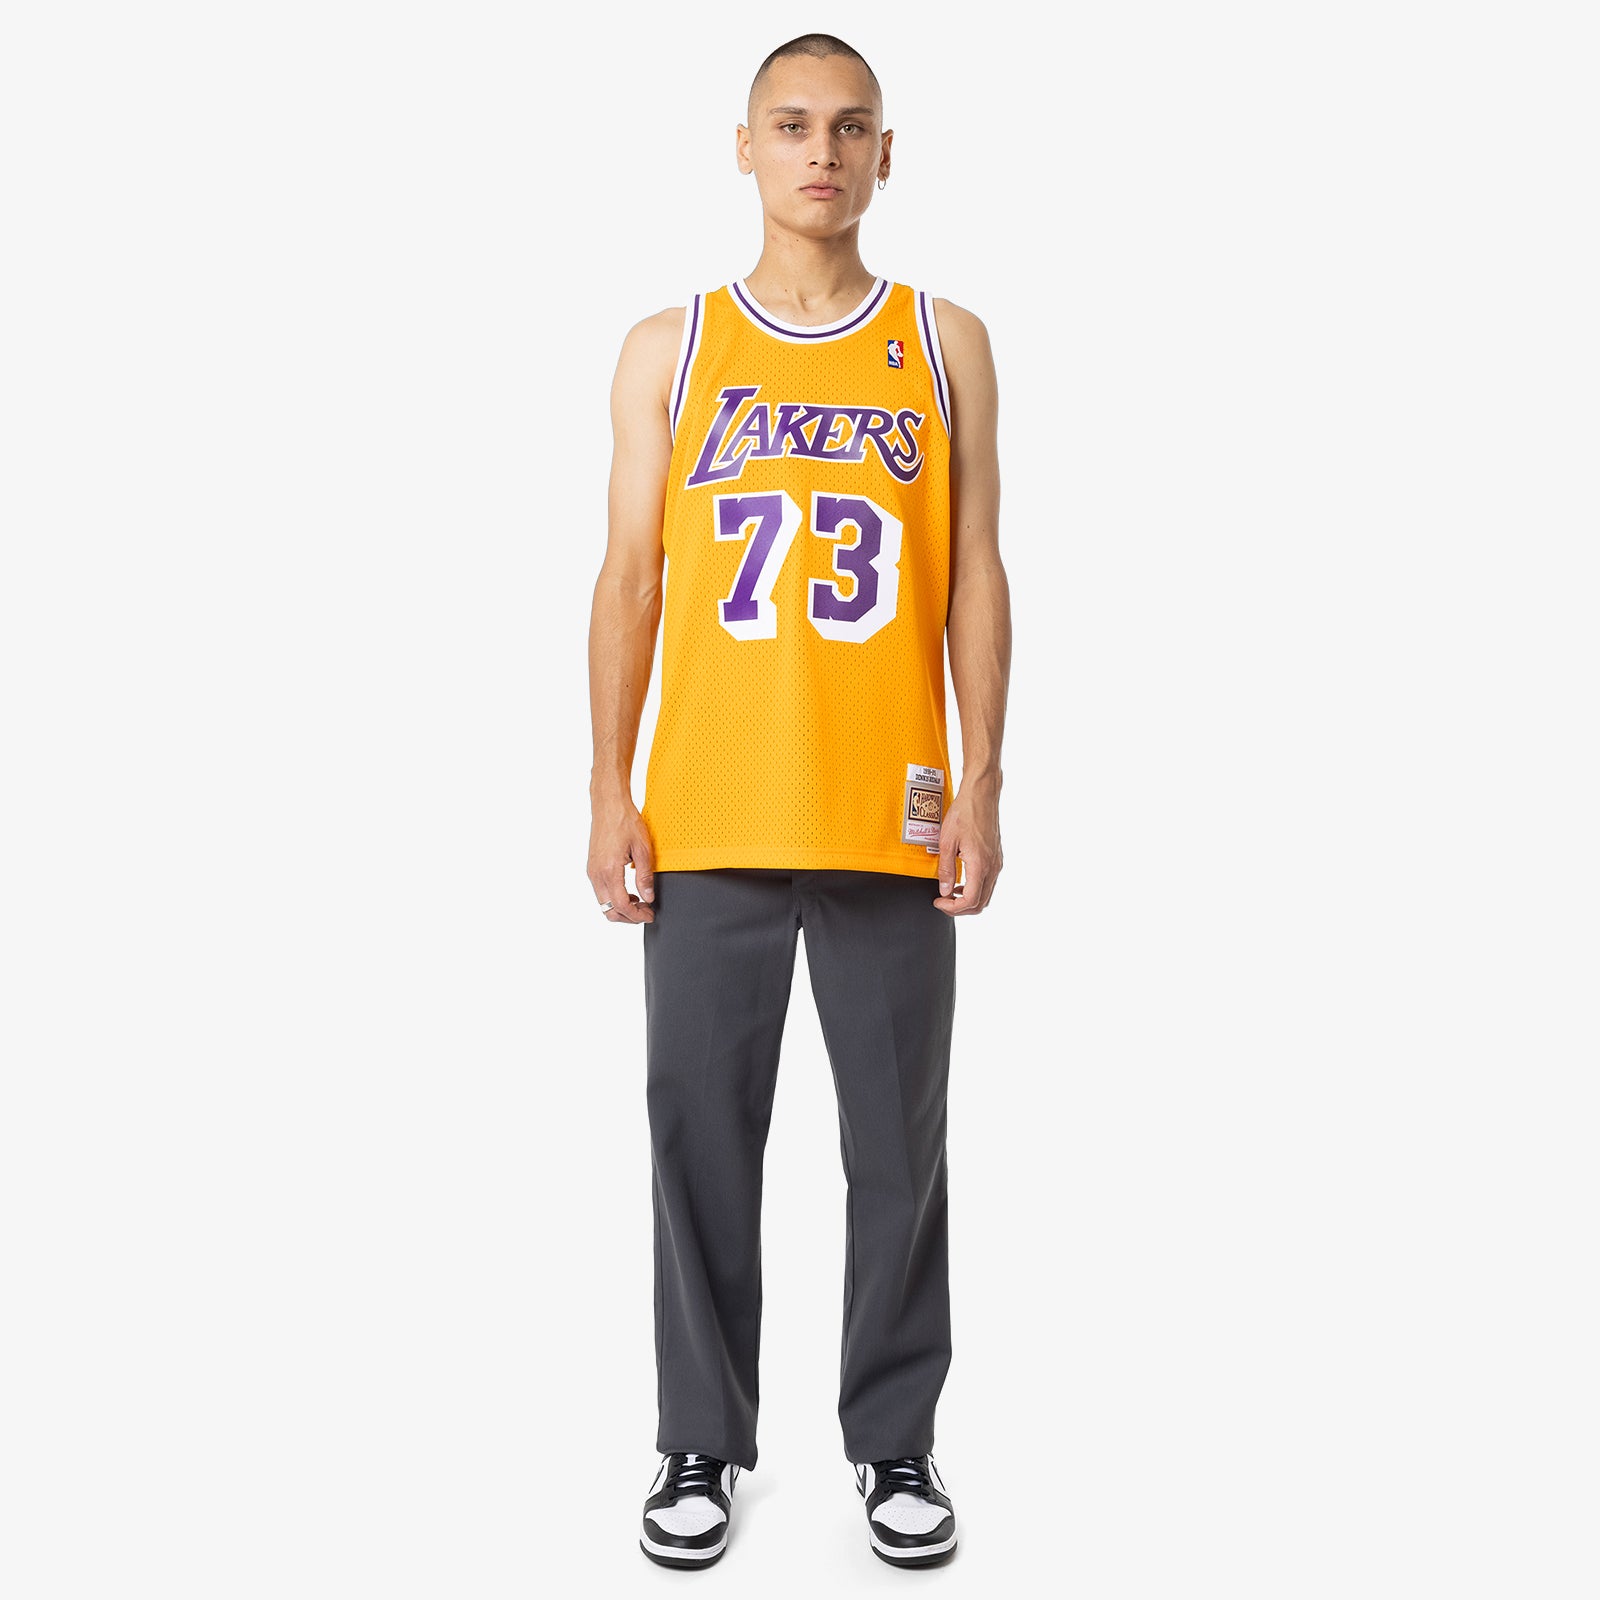 LA LAKERS DENNIS RODMAN JERSEY SMJYCP20064-LALGOLD98DRD